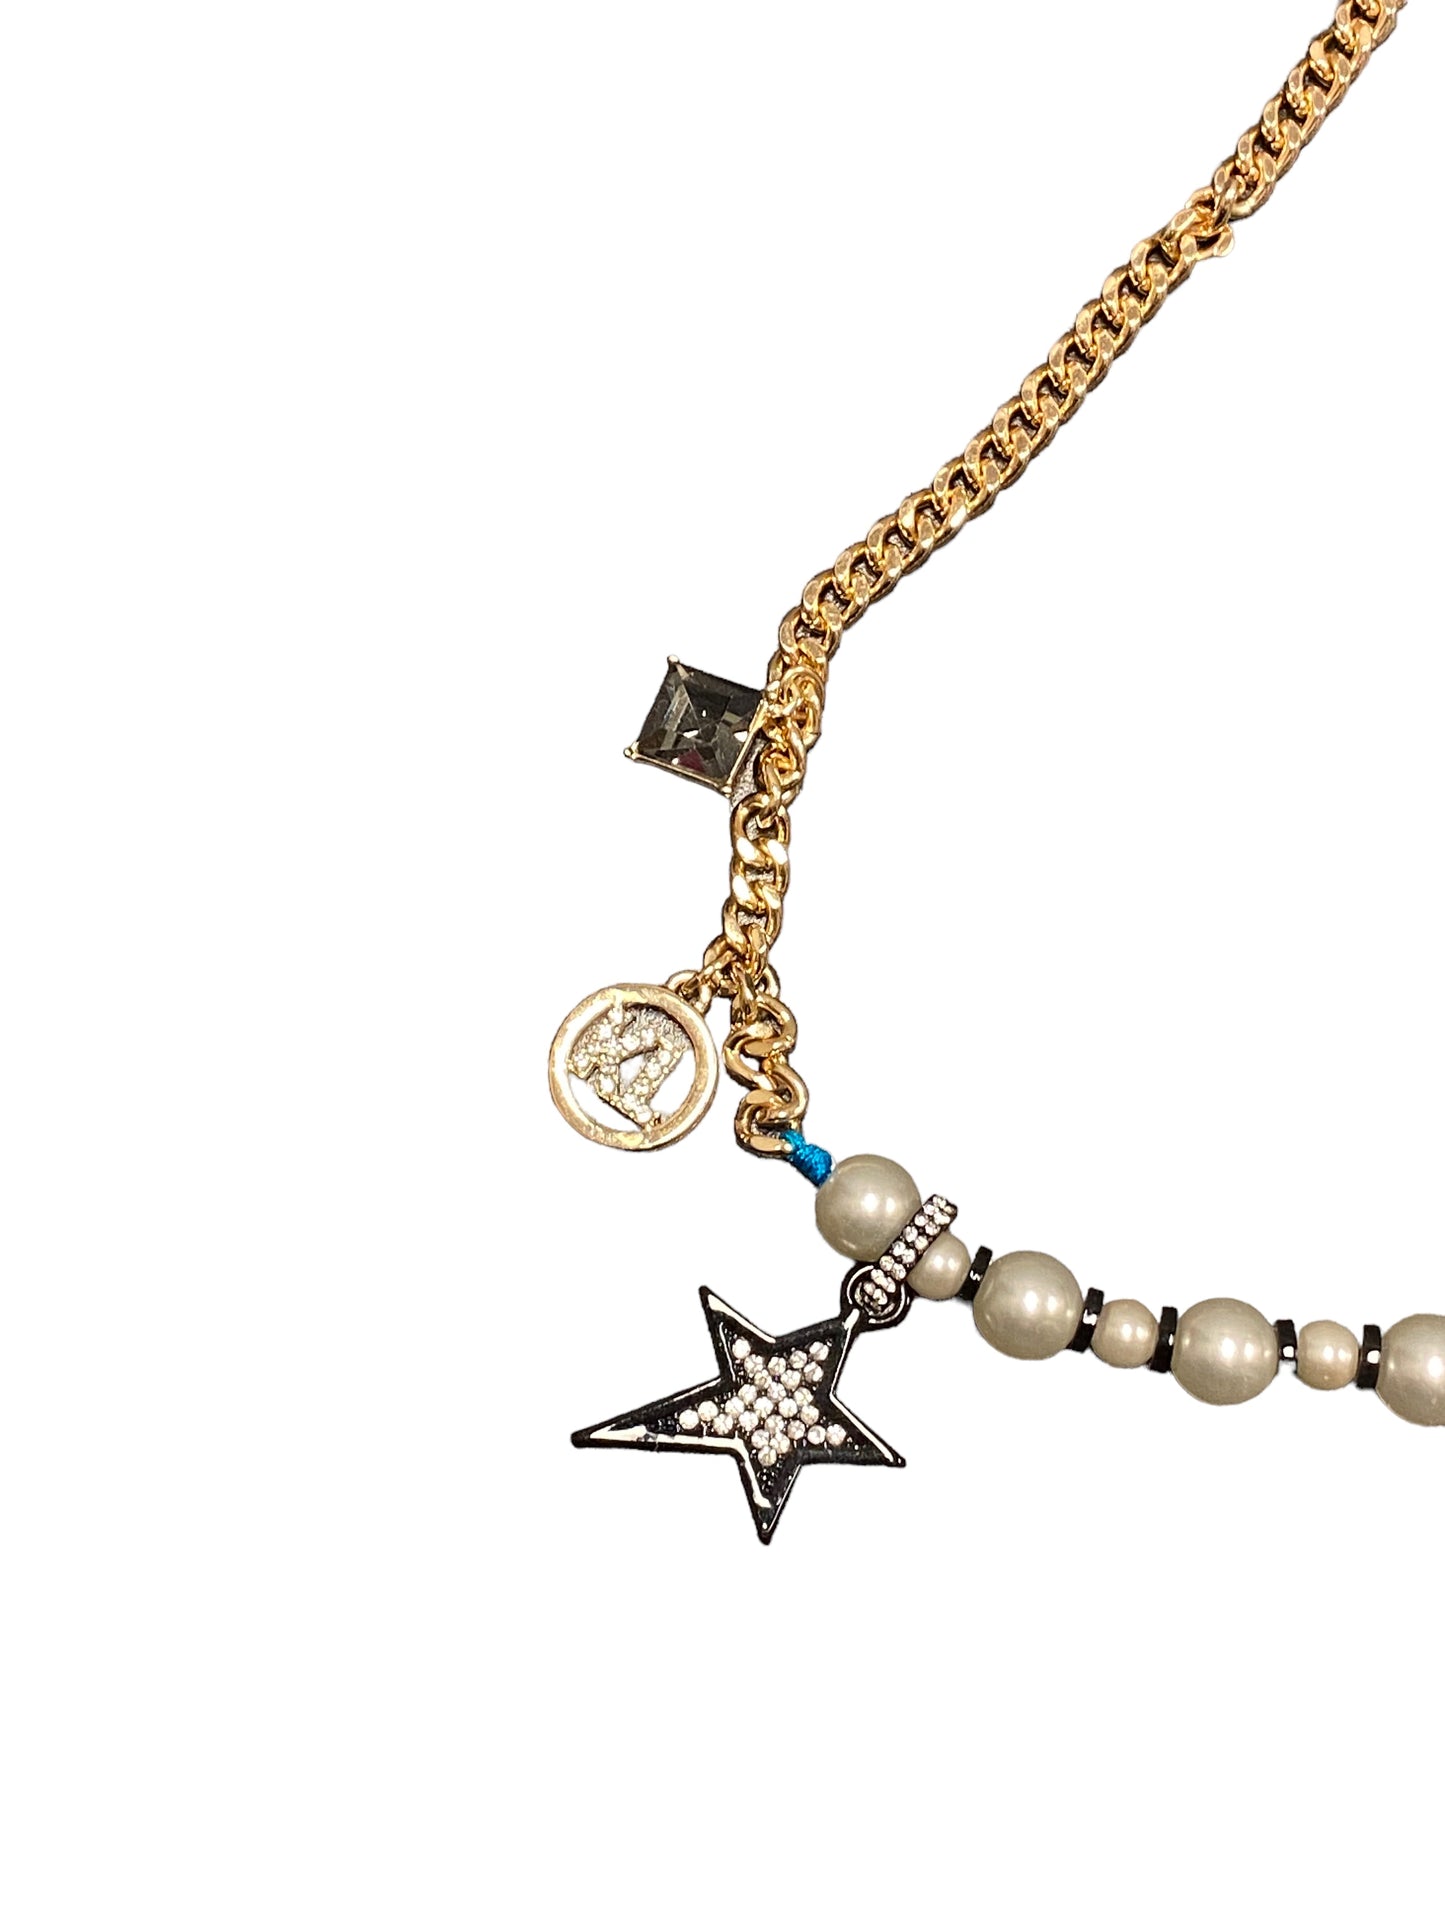 Necklace Charm Karl Lagerfeld